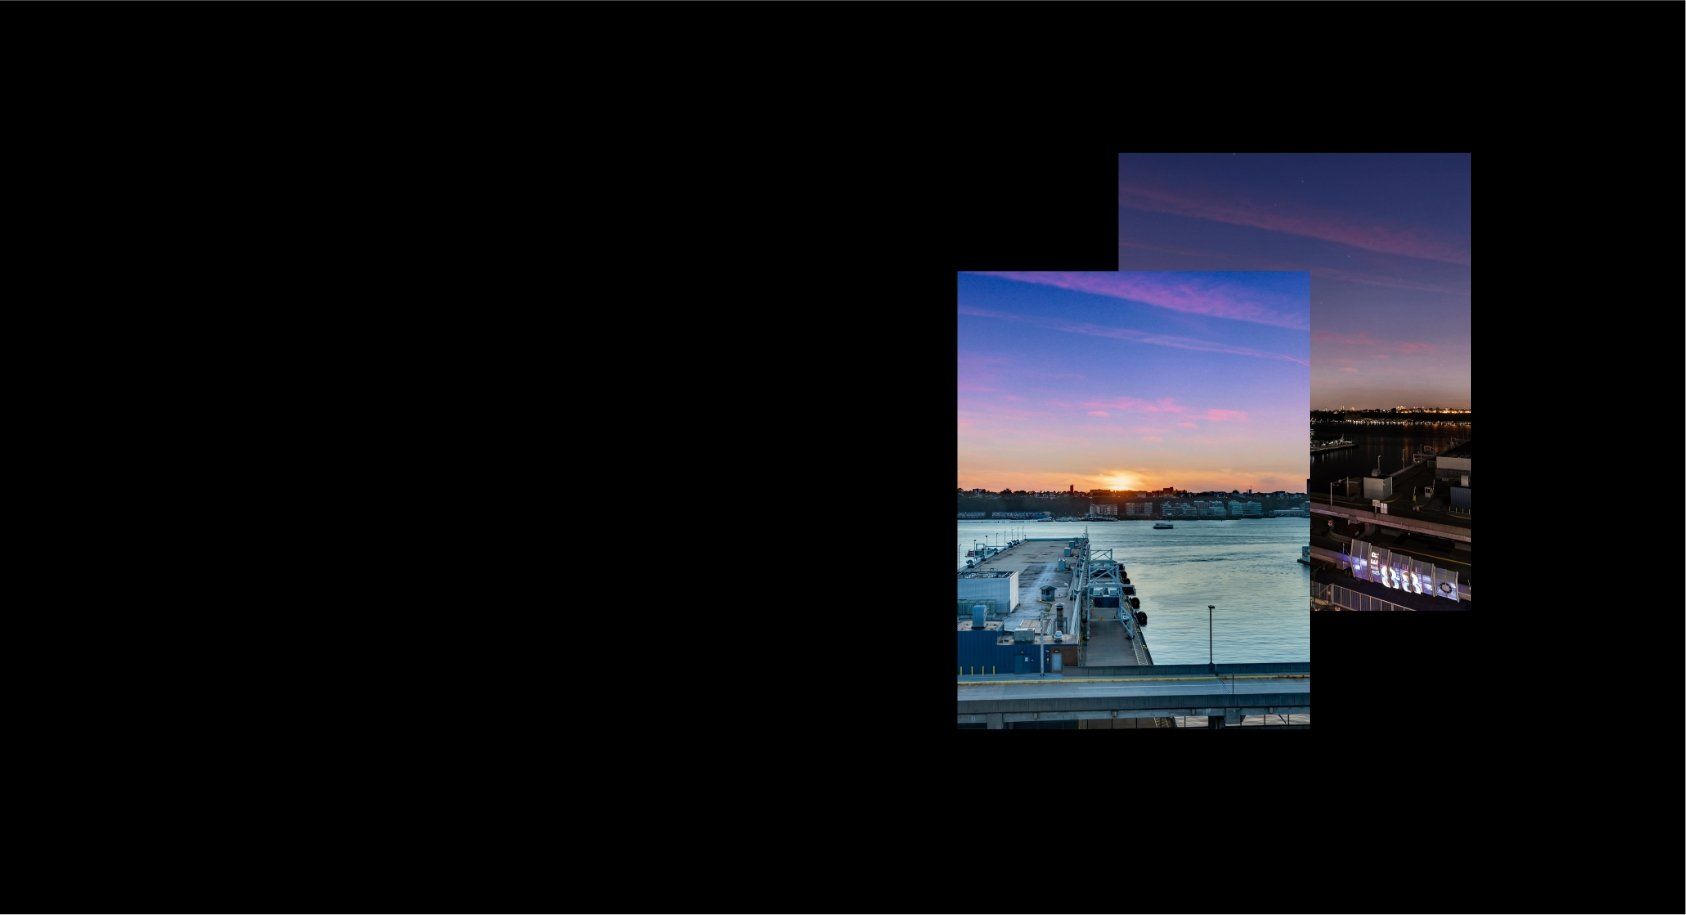 A collage of two pictures of a sunset over a body of water.